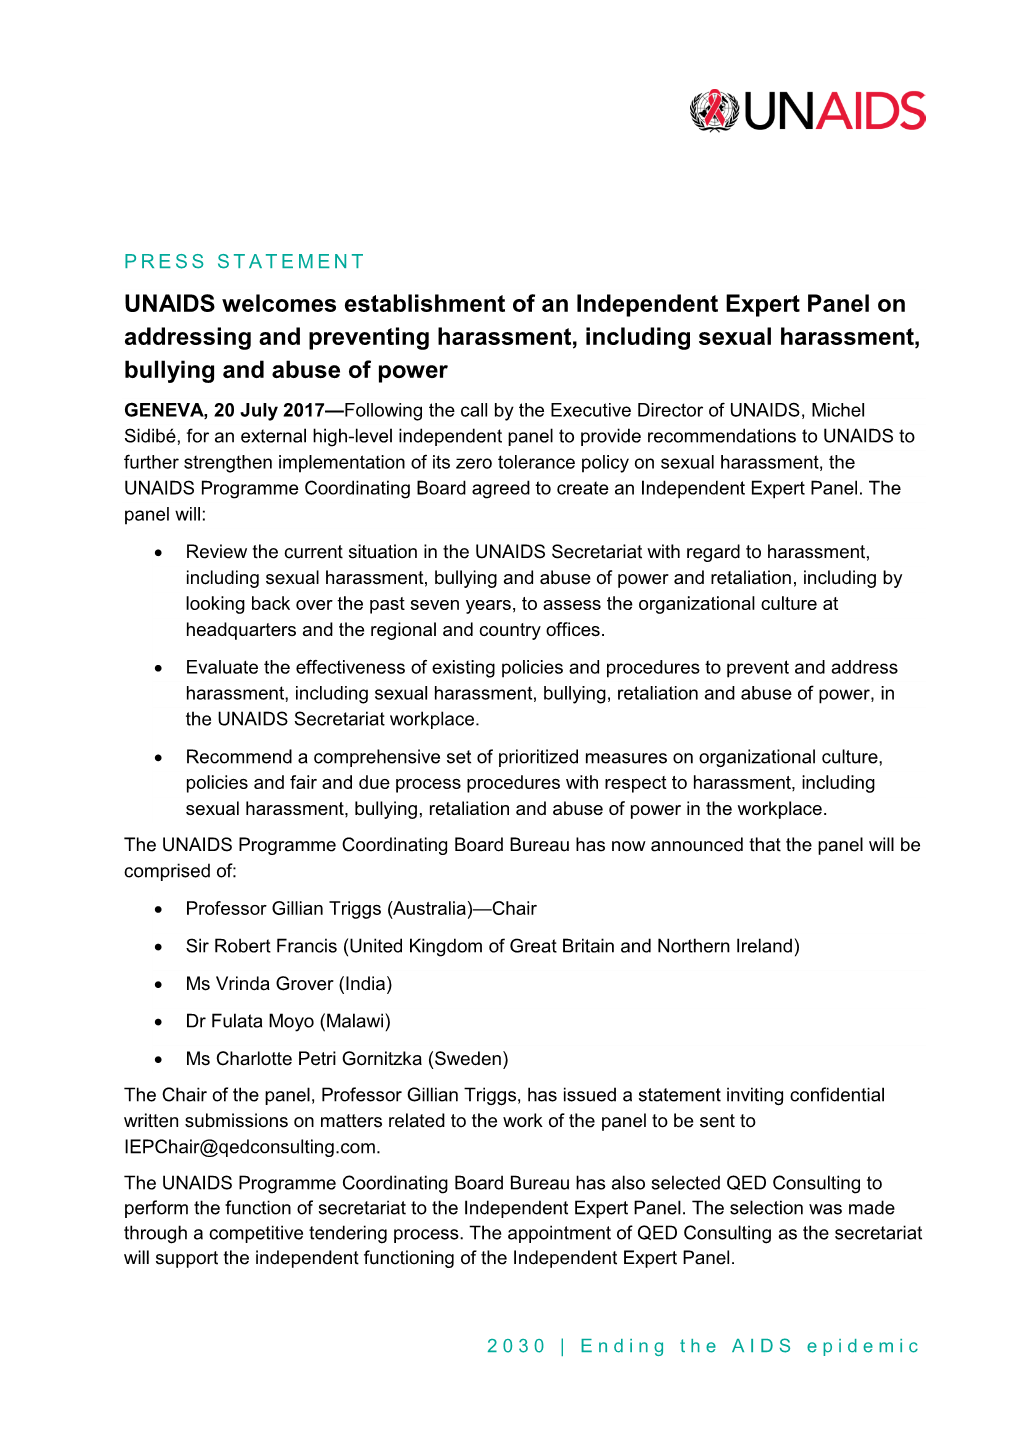 UNAIDS Welcomes Establishment of an Independent Expert Panel On